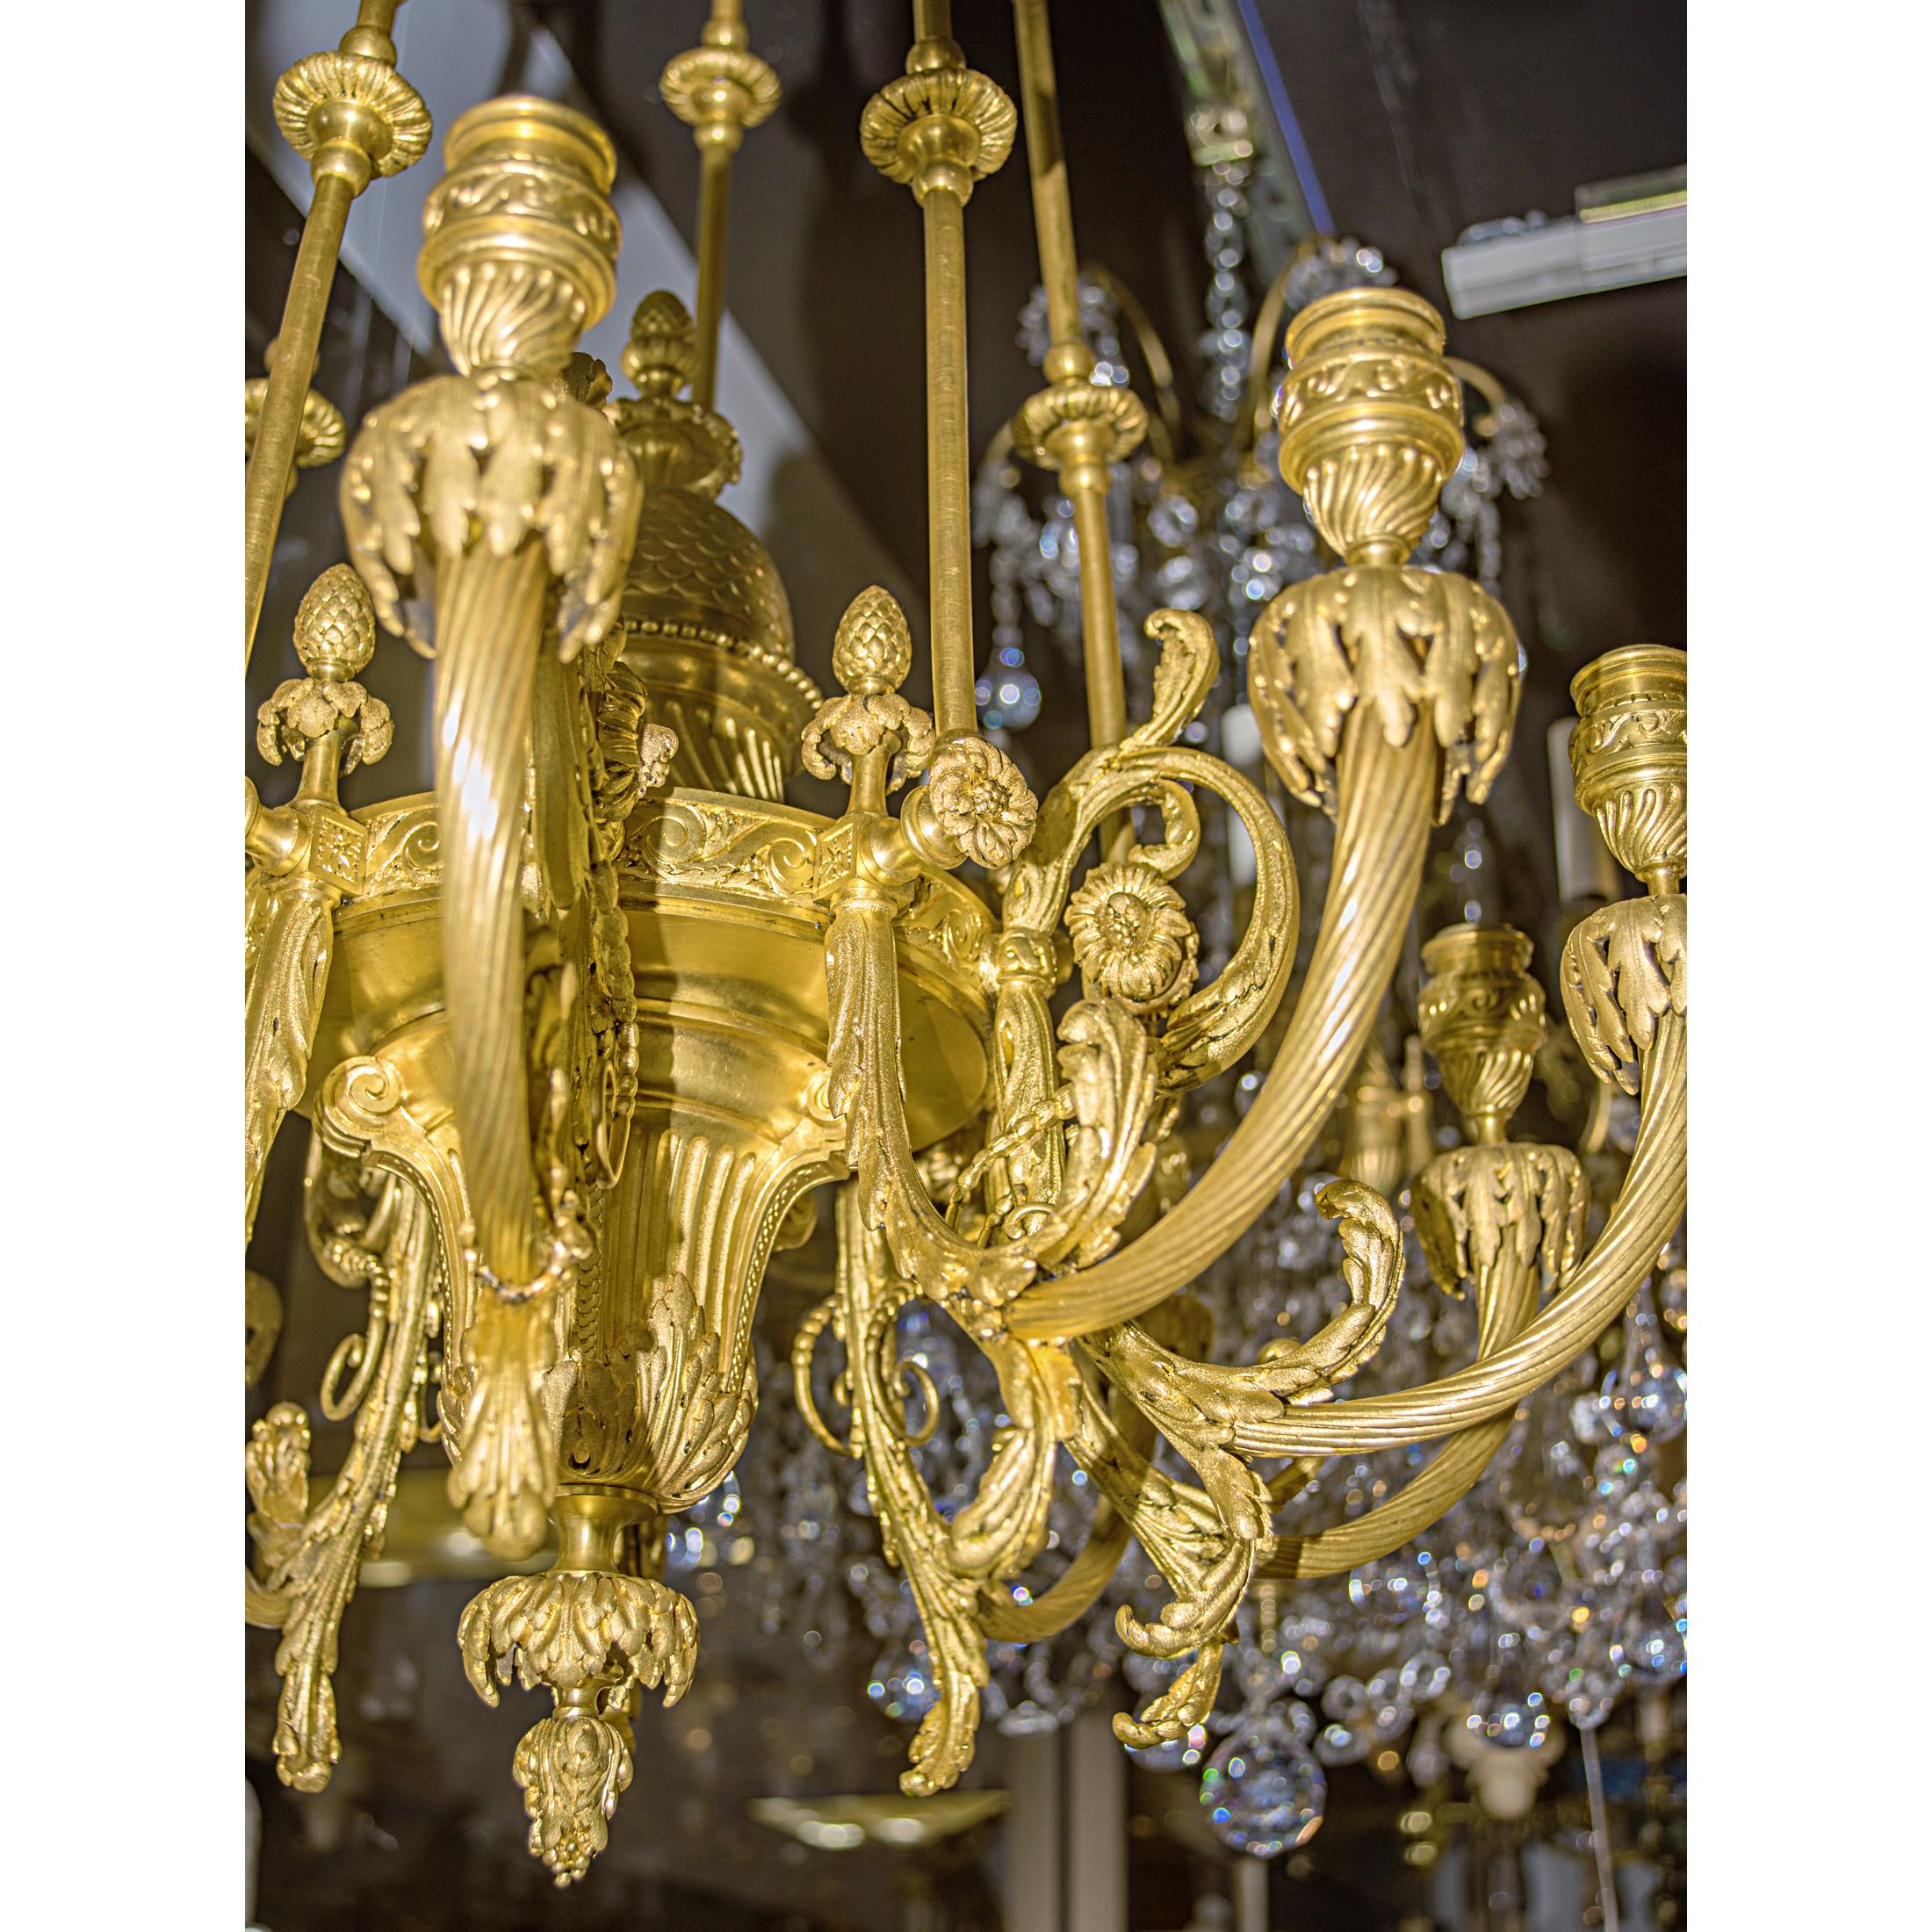 About

An Important French Gilt Bronze Ten-Light Chandelier by F. Barbedienne

Maker: Ferdinand Barbedienne (1810-1892)
Date: circa 1885
Origin: French
Dimension: height: 40 x 25 inches.